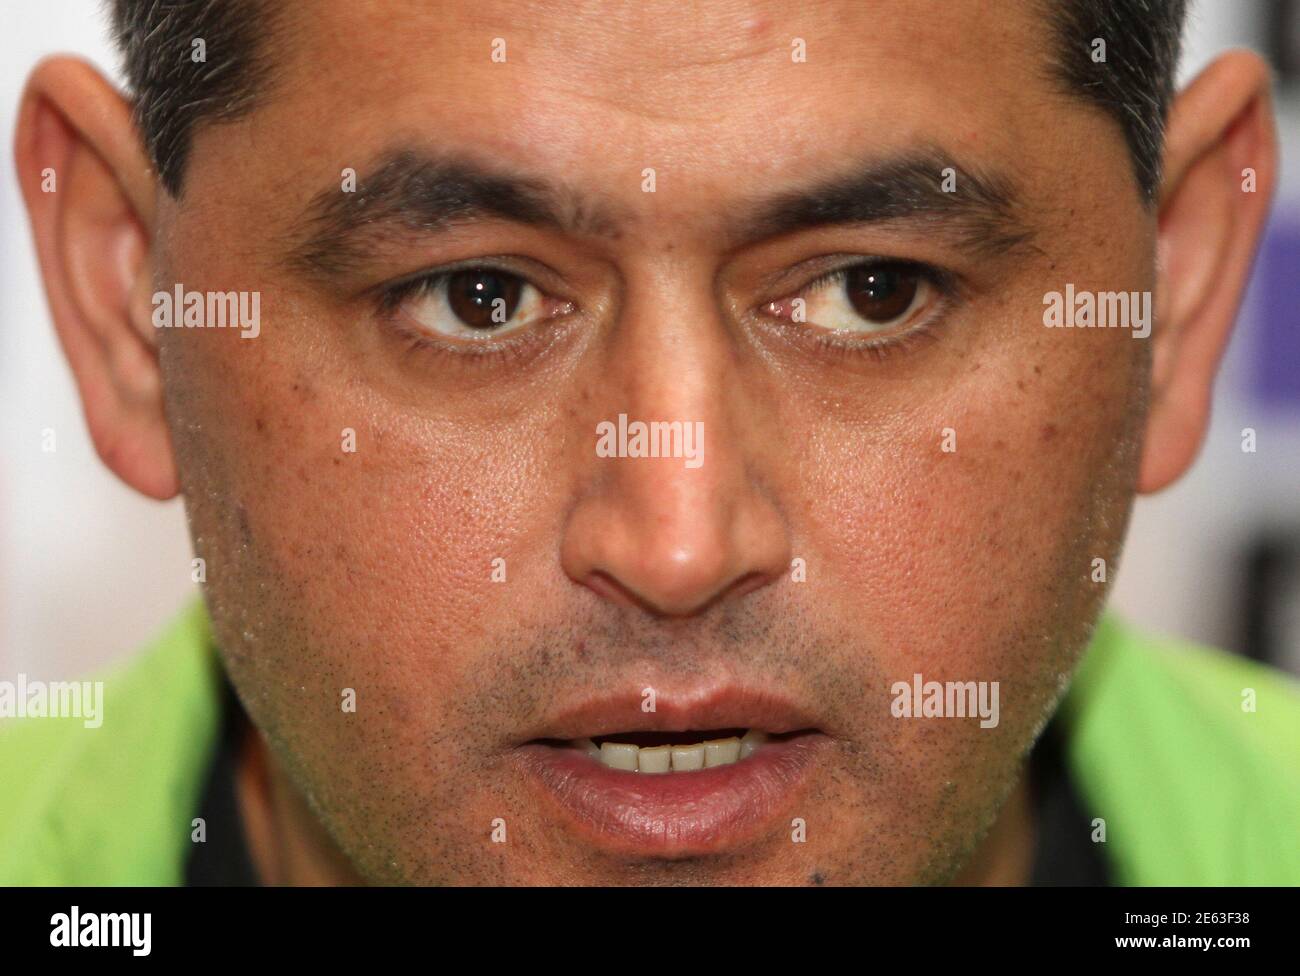 Paraguay's national soccer team coach Francisco Arce speaks during an interview in Asuncion August 24, 2011. Arce must curb his tempestuous nature and adhere to the discipline he admires in his 'second father' Luiz Felipe Scolari if he is to succeed with Paraguay, the new coach told Reuters. Picture taken August 24, 2011.        To match interview SOCCER-LATAM/PARAGUAY-ARCE         REUTERS/Jorge Adorno (PARAGUAY - Tags: SPORT SOCCER HEADSHOT) Stock Photo